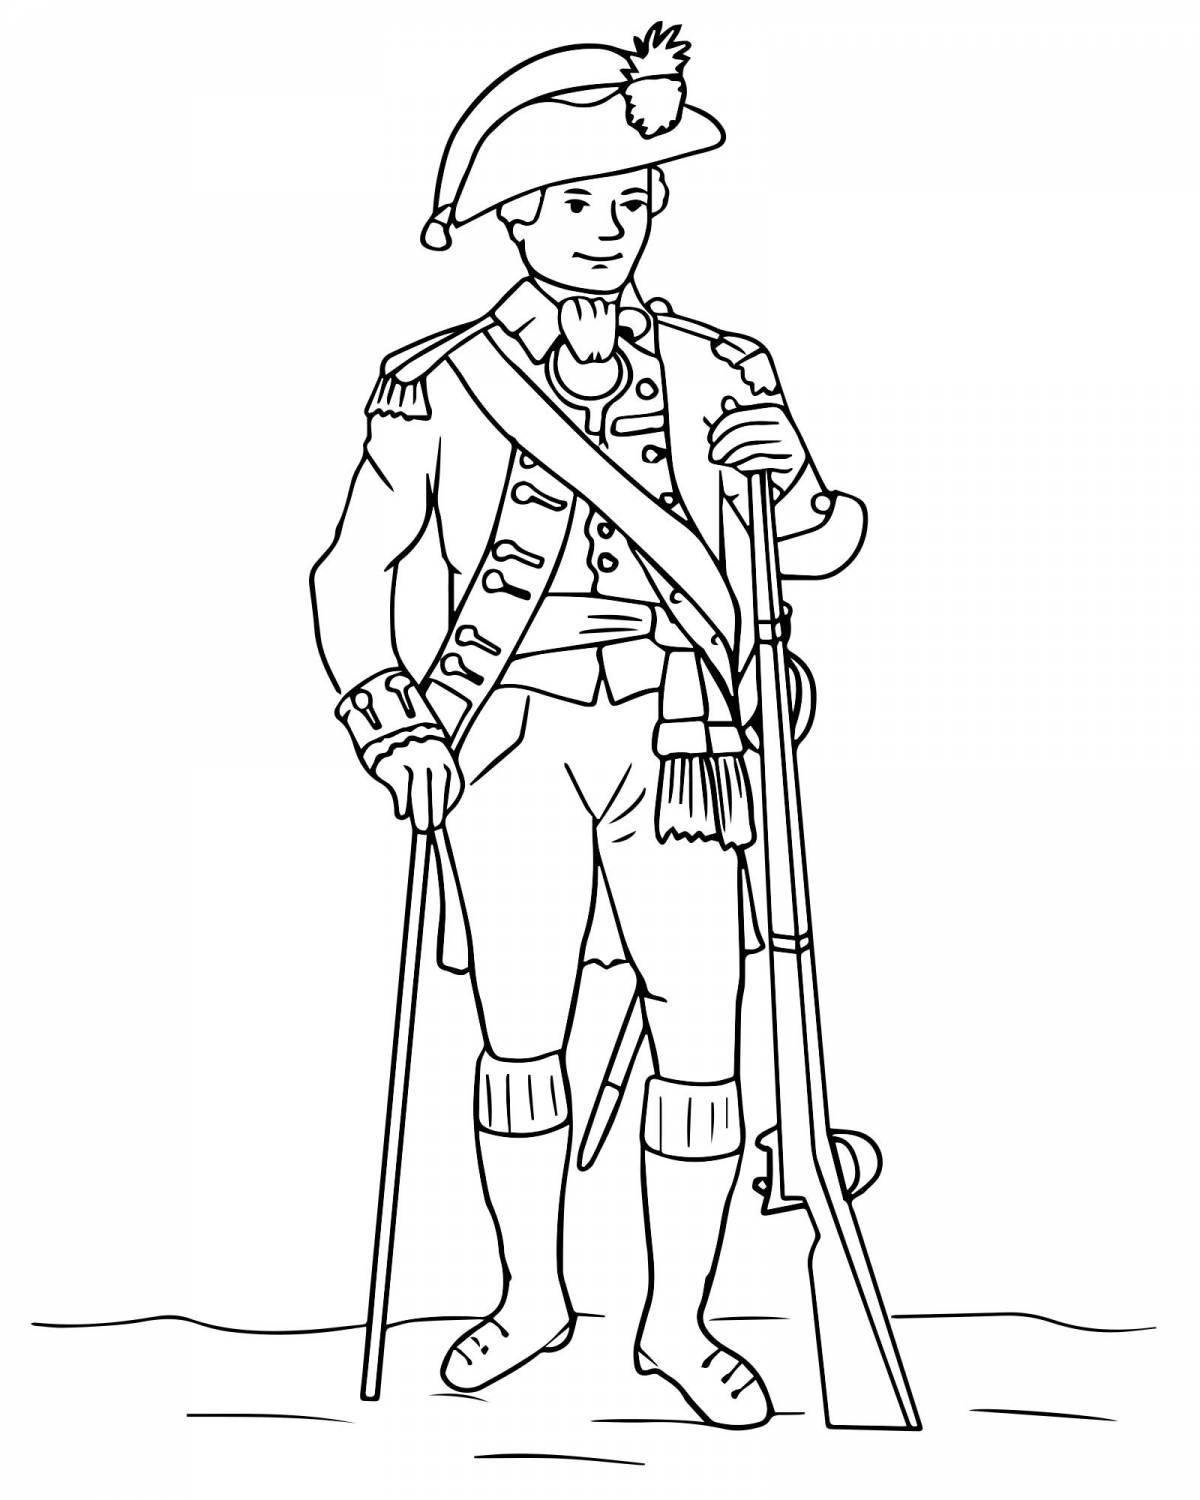 Great coloring pages of soldiers for kids